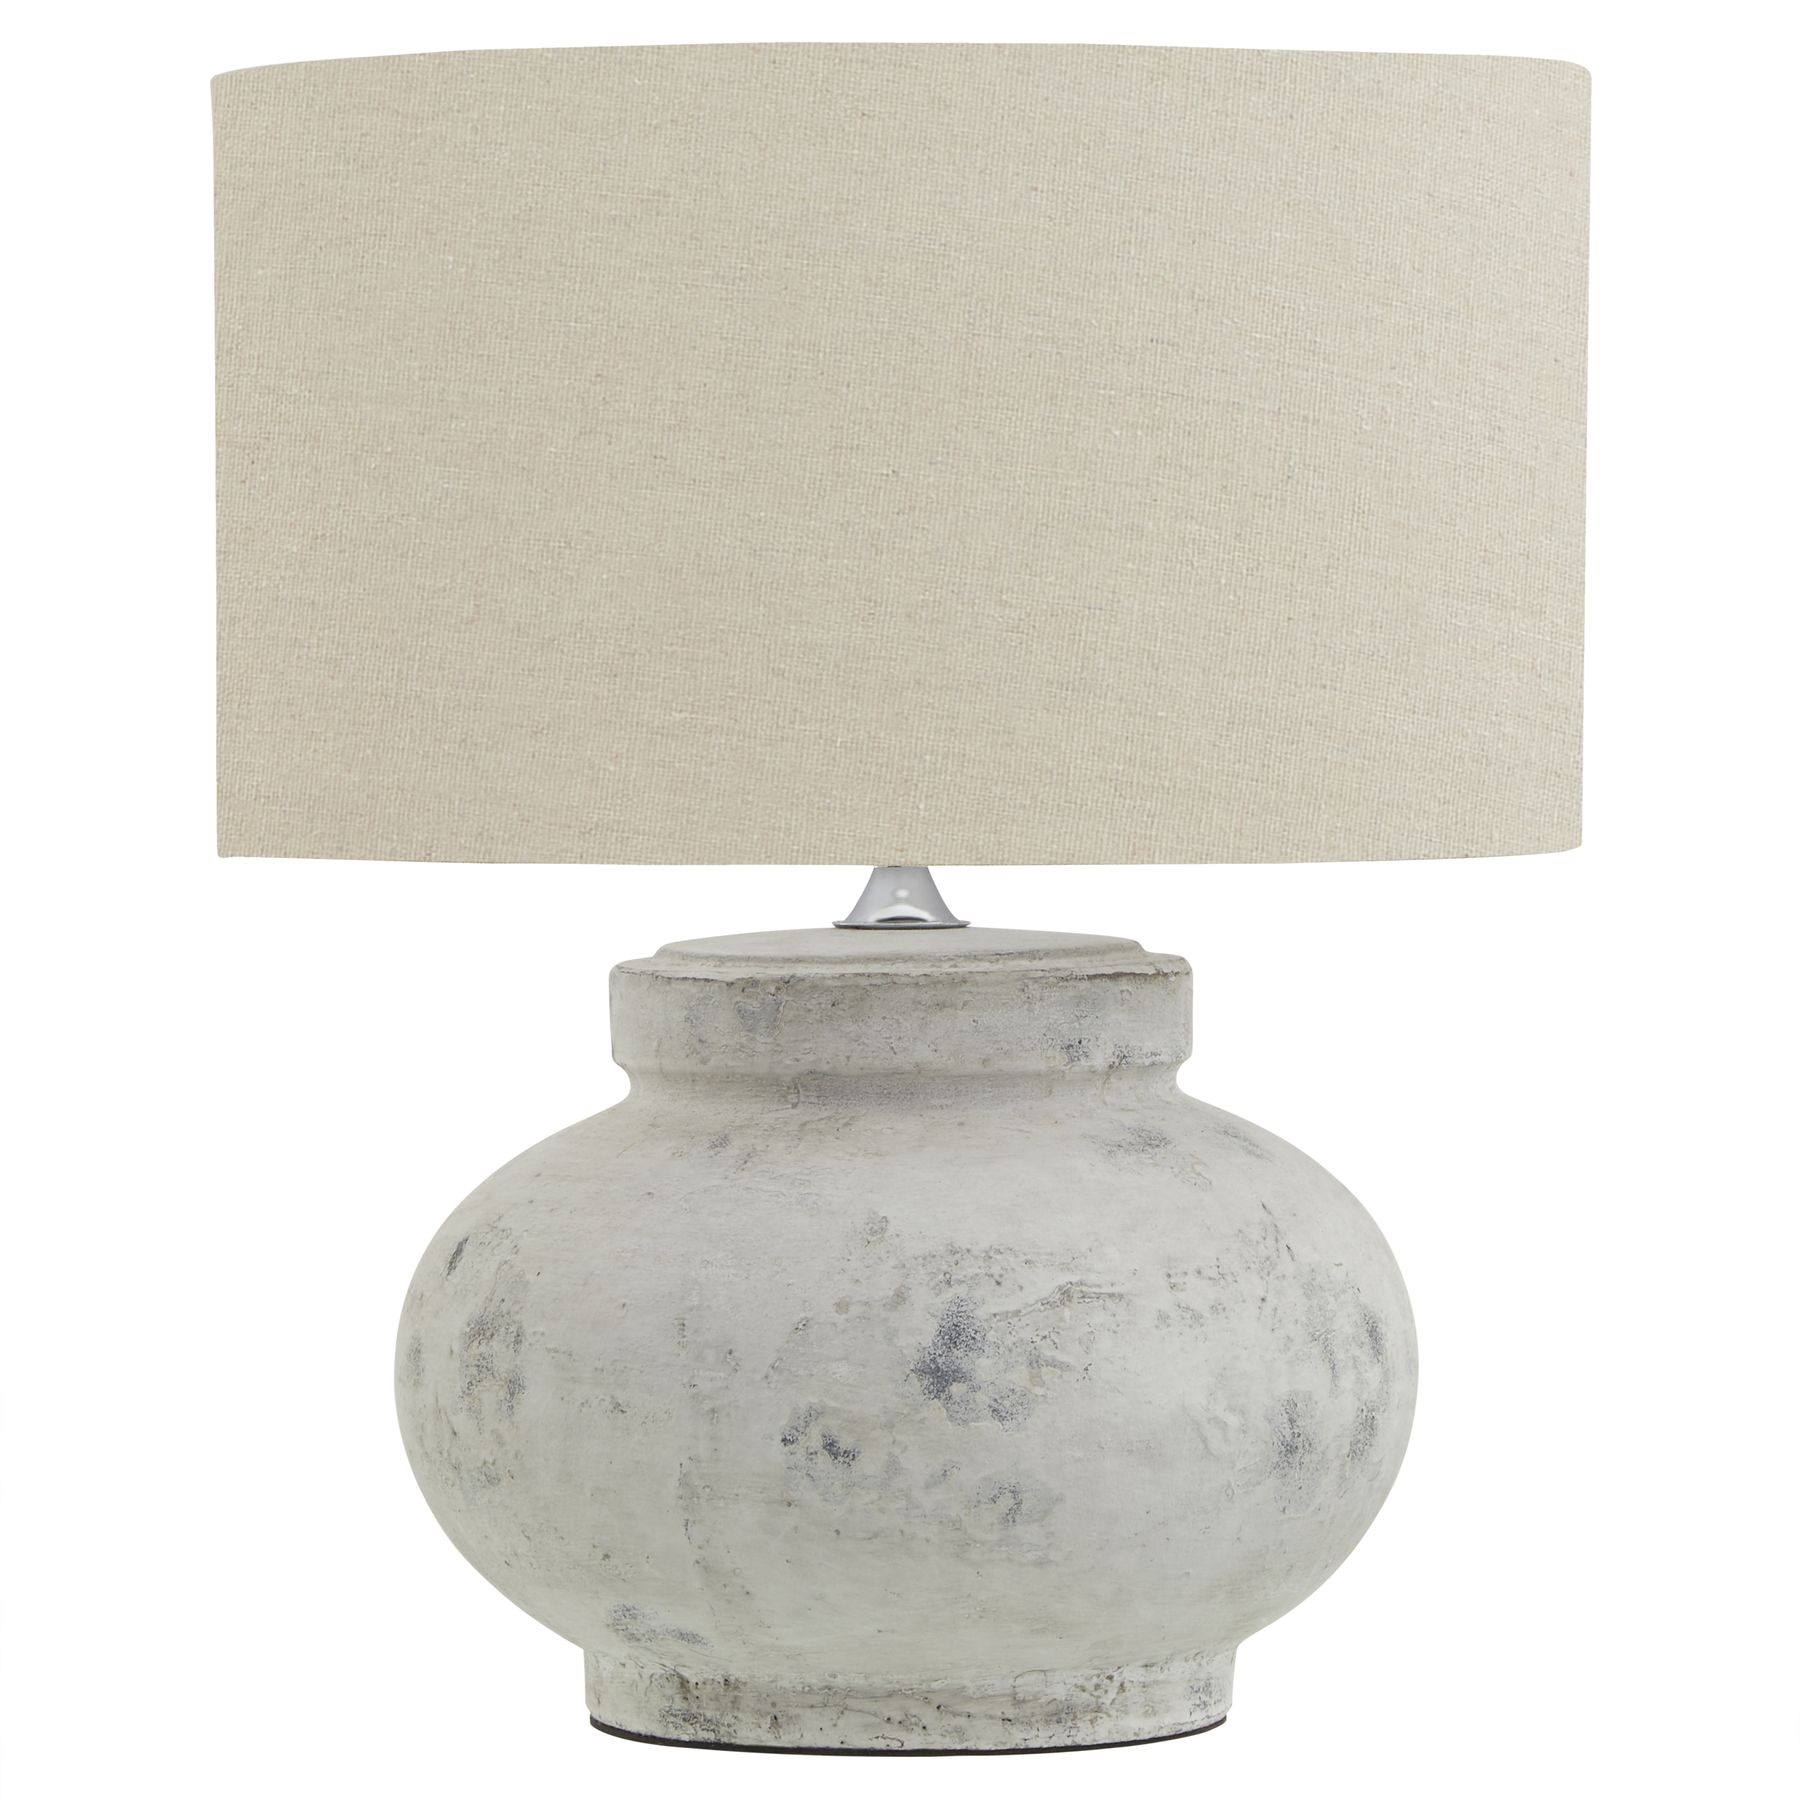 Darcy Antique White Squat Table Lamp With Linen Shade - Image 1